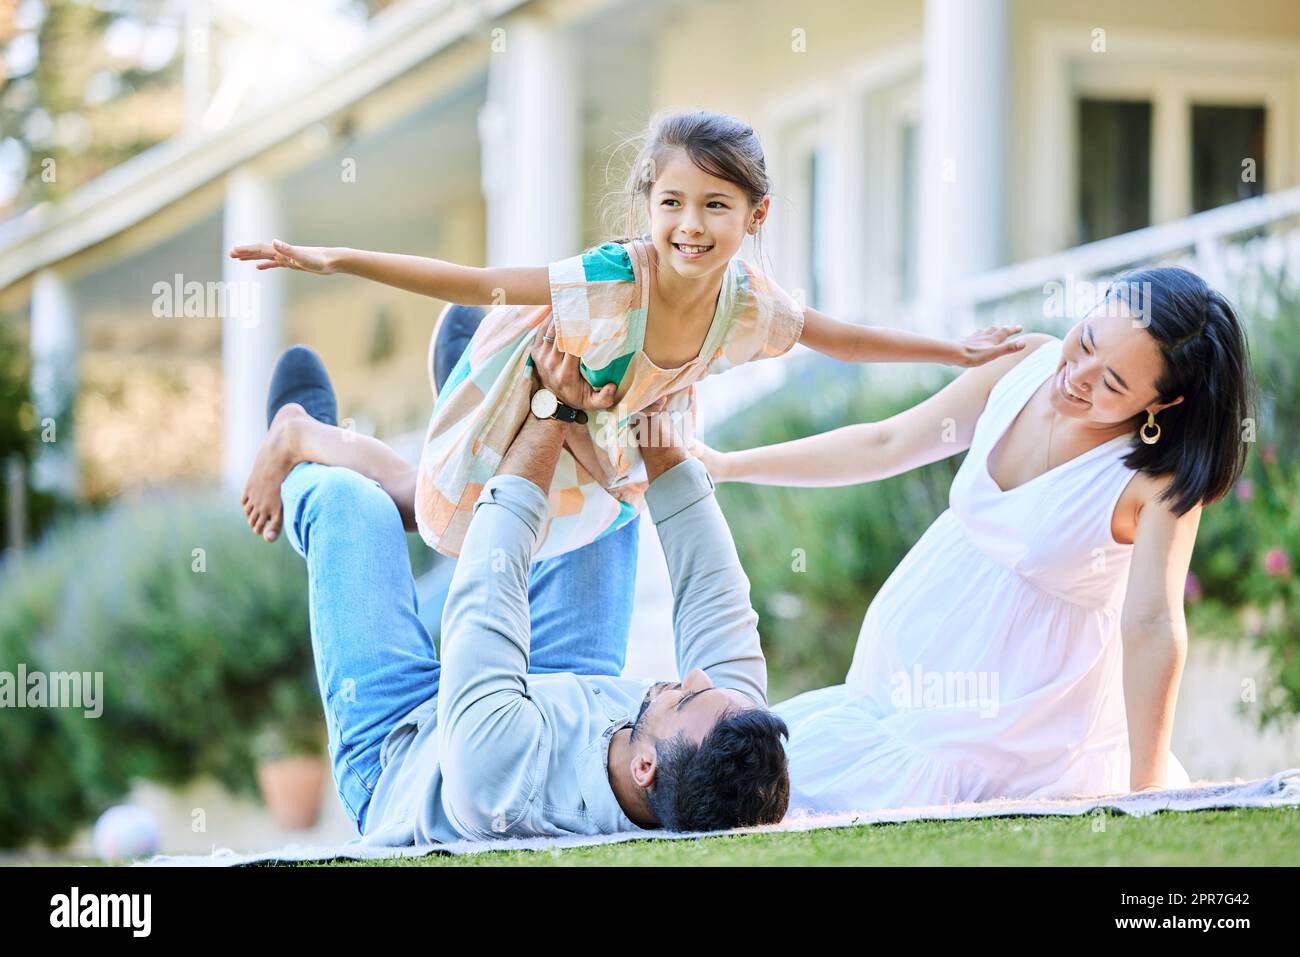 Be as free as you want to be. Shot of a young family relaxing in their garden outside. Stock Photo